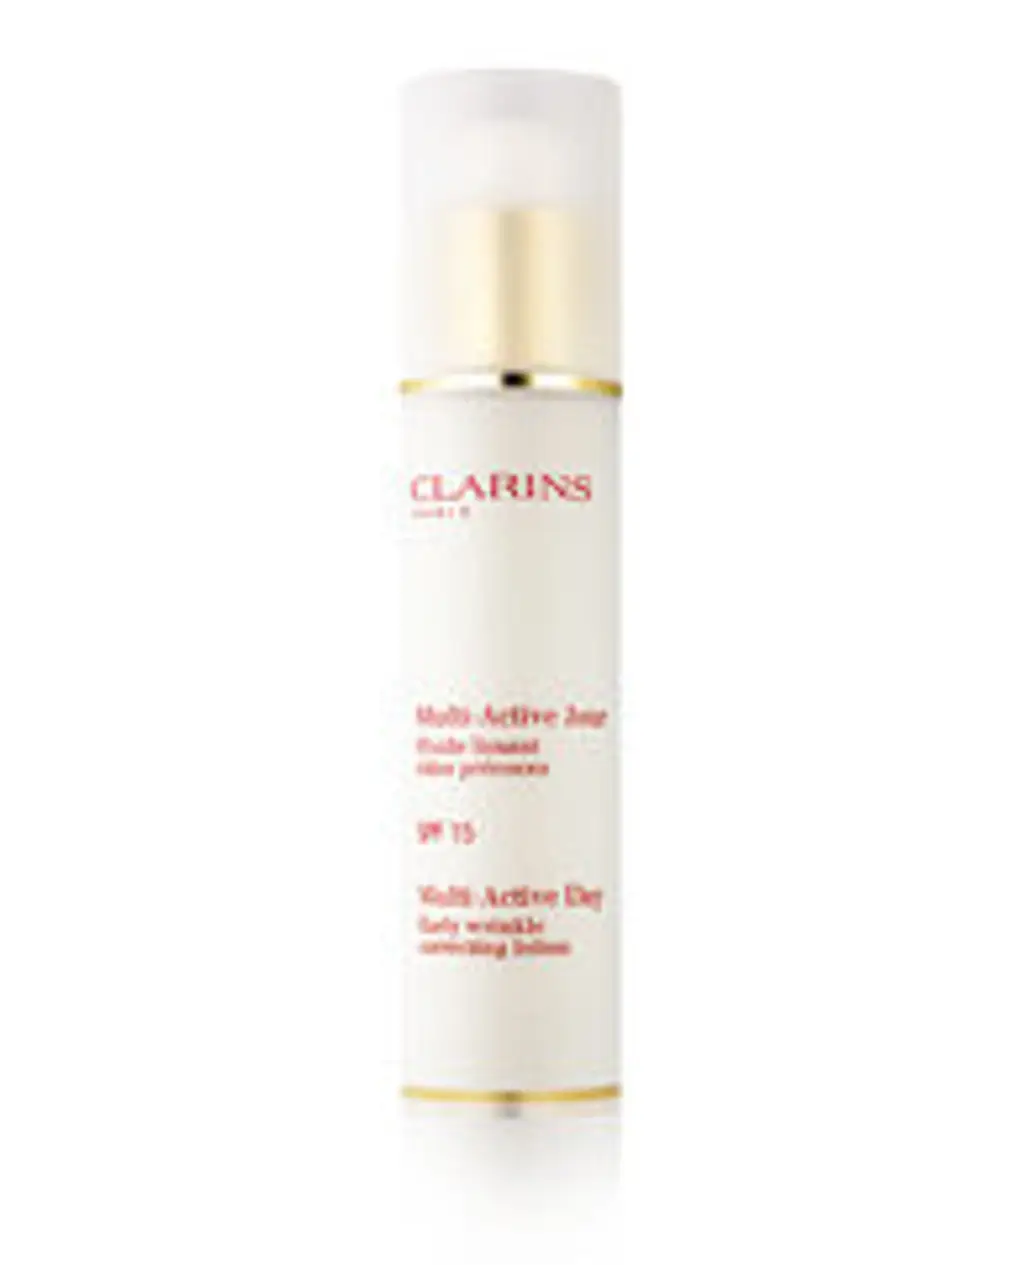 Clarins Multi-Active Day Early Wrinkle Correcting Lotion SPF 15